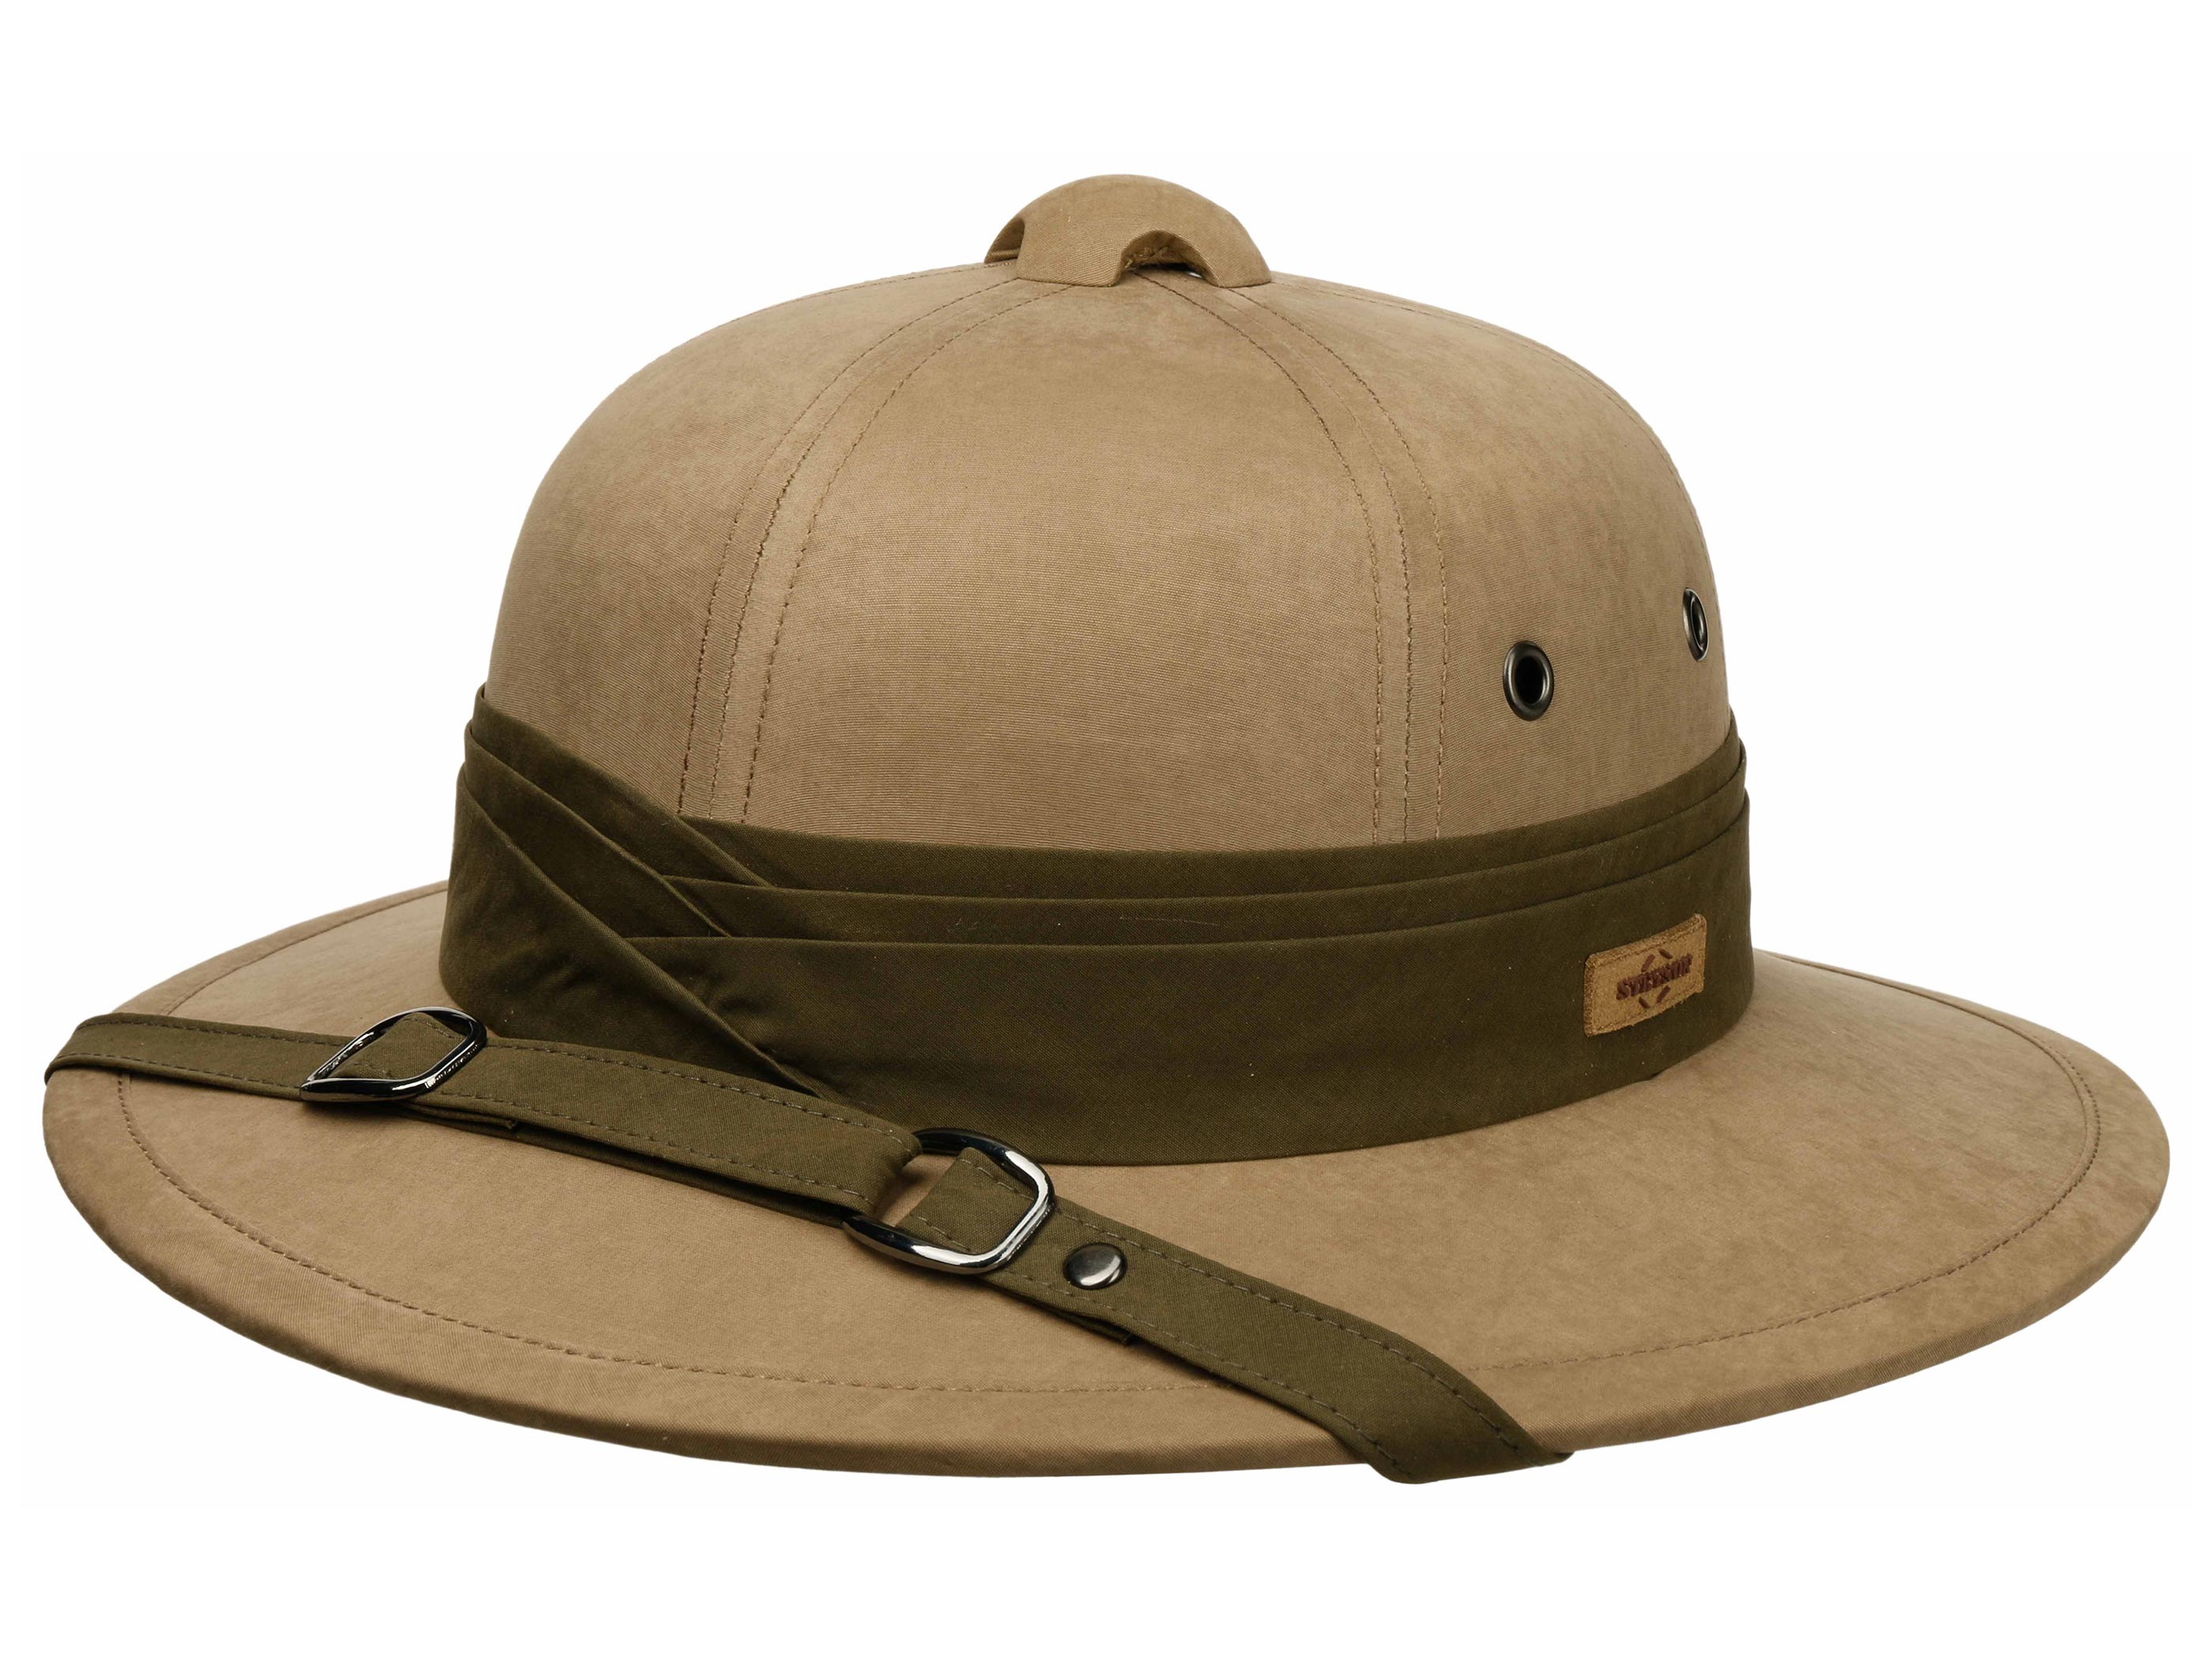 Stetson Pith Helmet Waxed Cotton WR